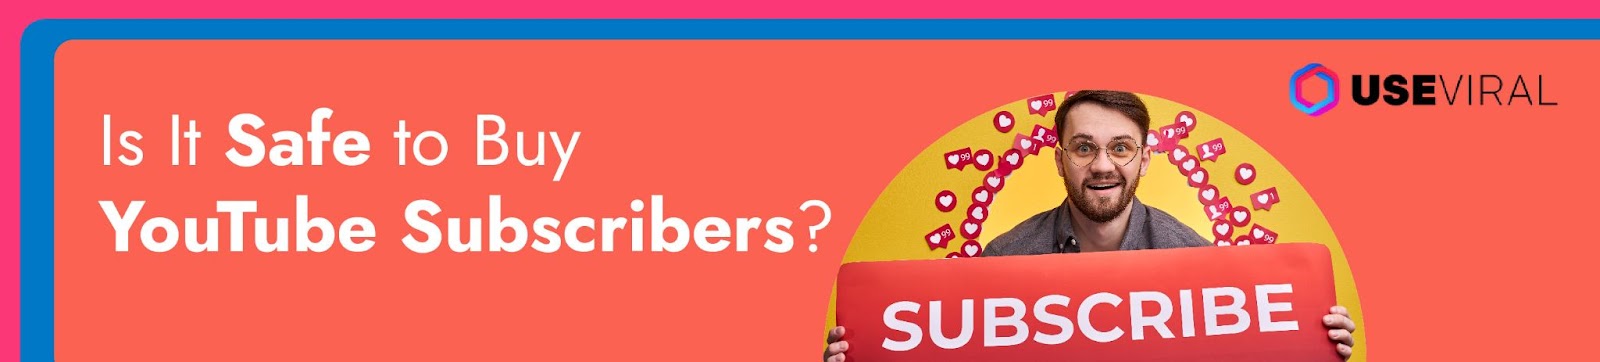 Is It Safe to Buy YouTube Subscribers?